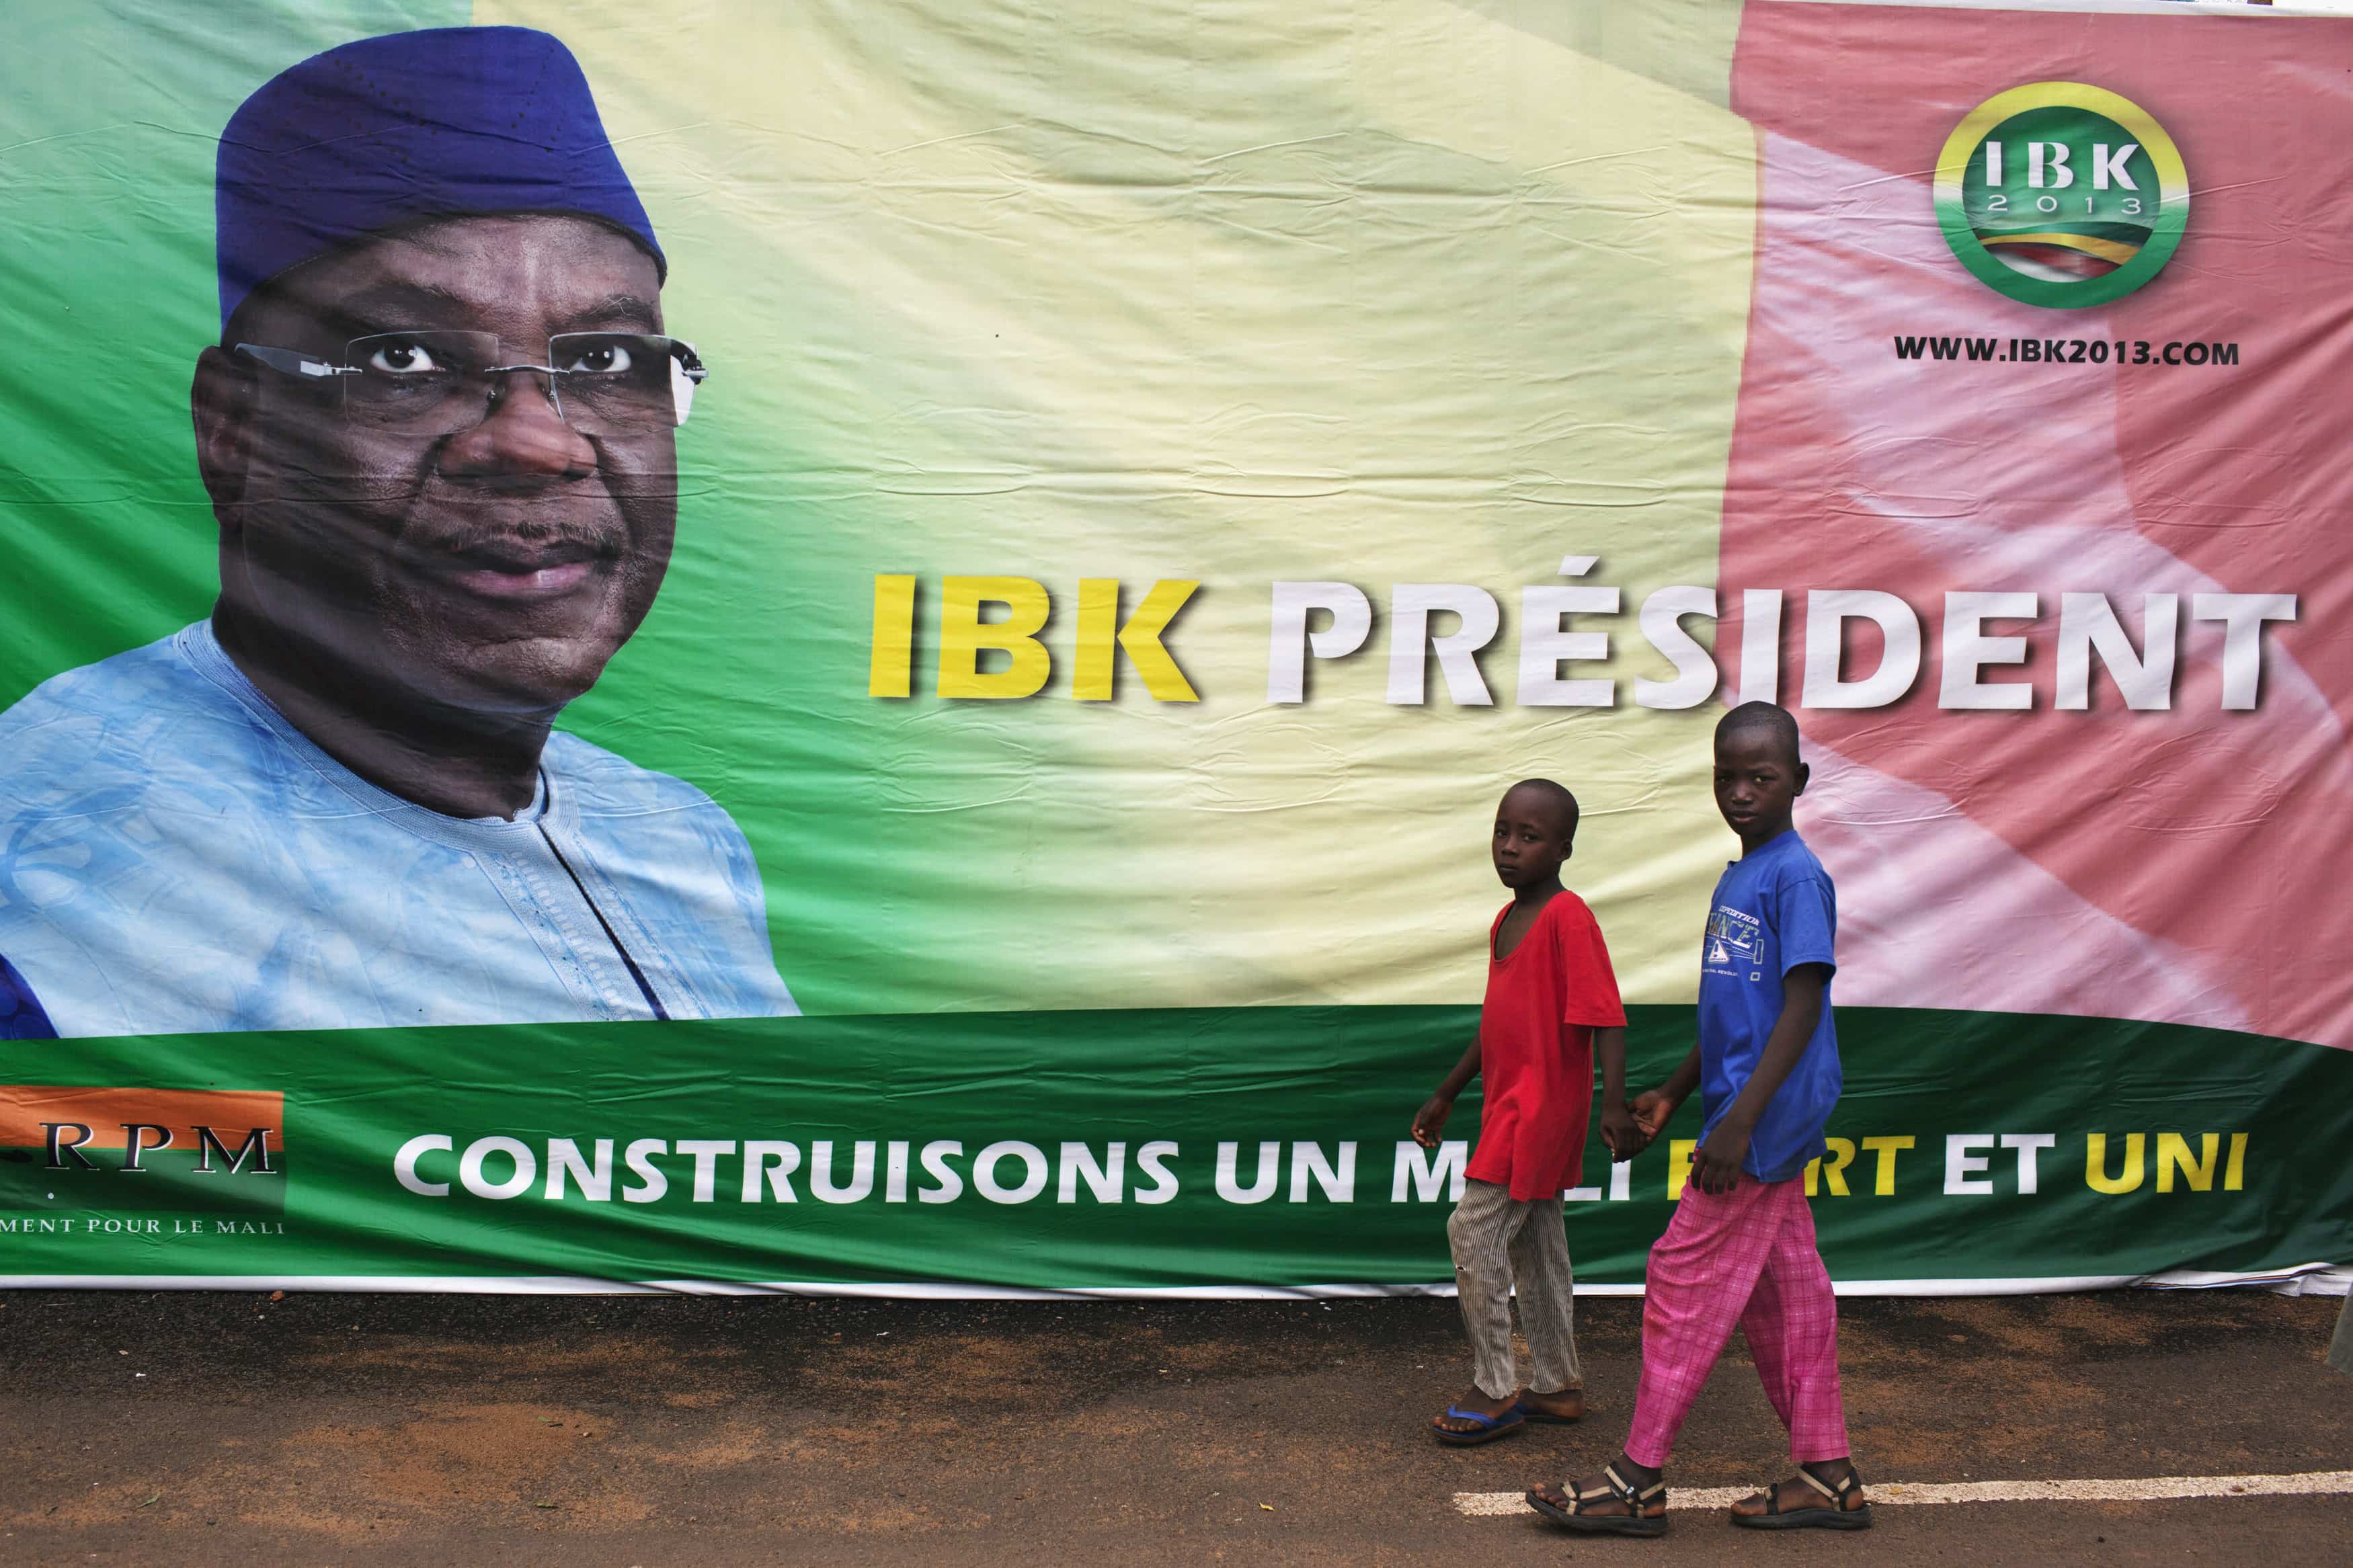 Boys walk in front of a poster of Mali's President-elect Ibrahim Boubacar Keita in Bamako, 13 August 2013. , REUTERS/Joe Penney